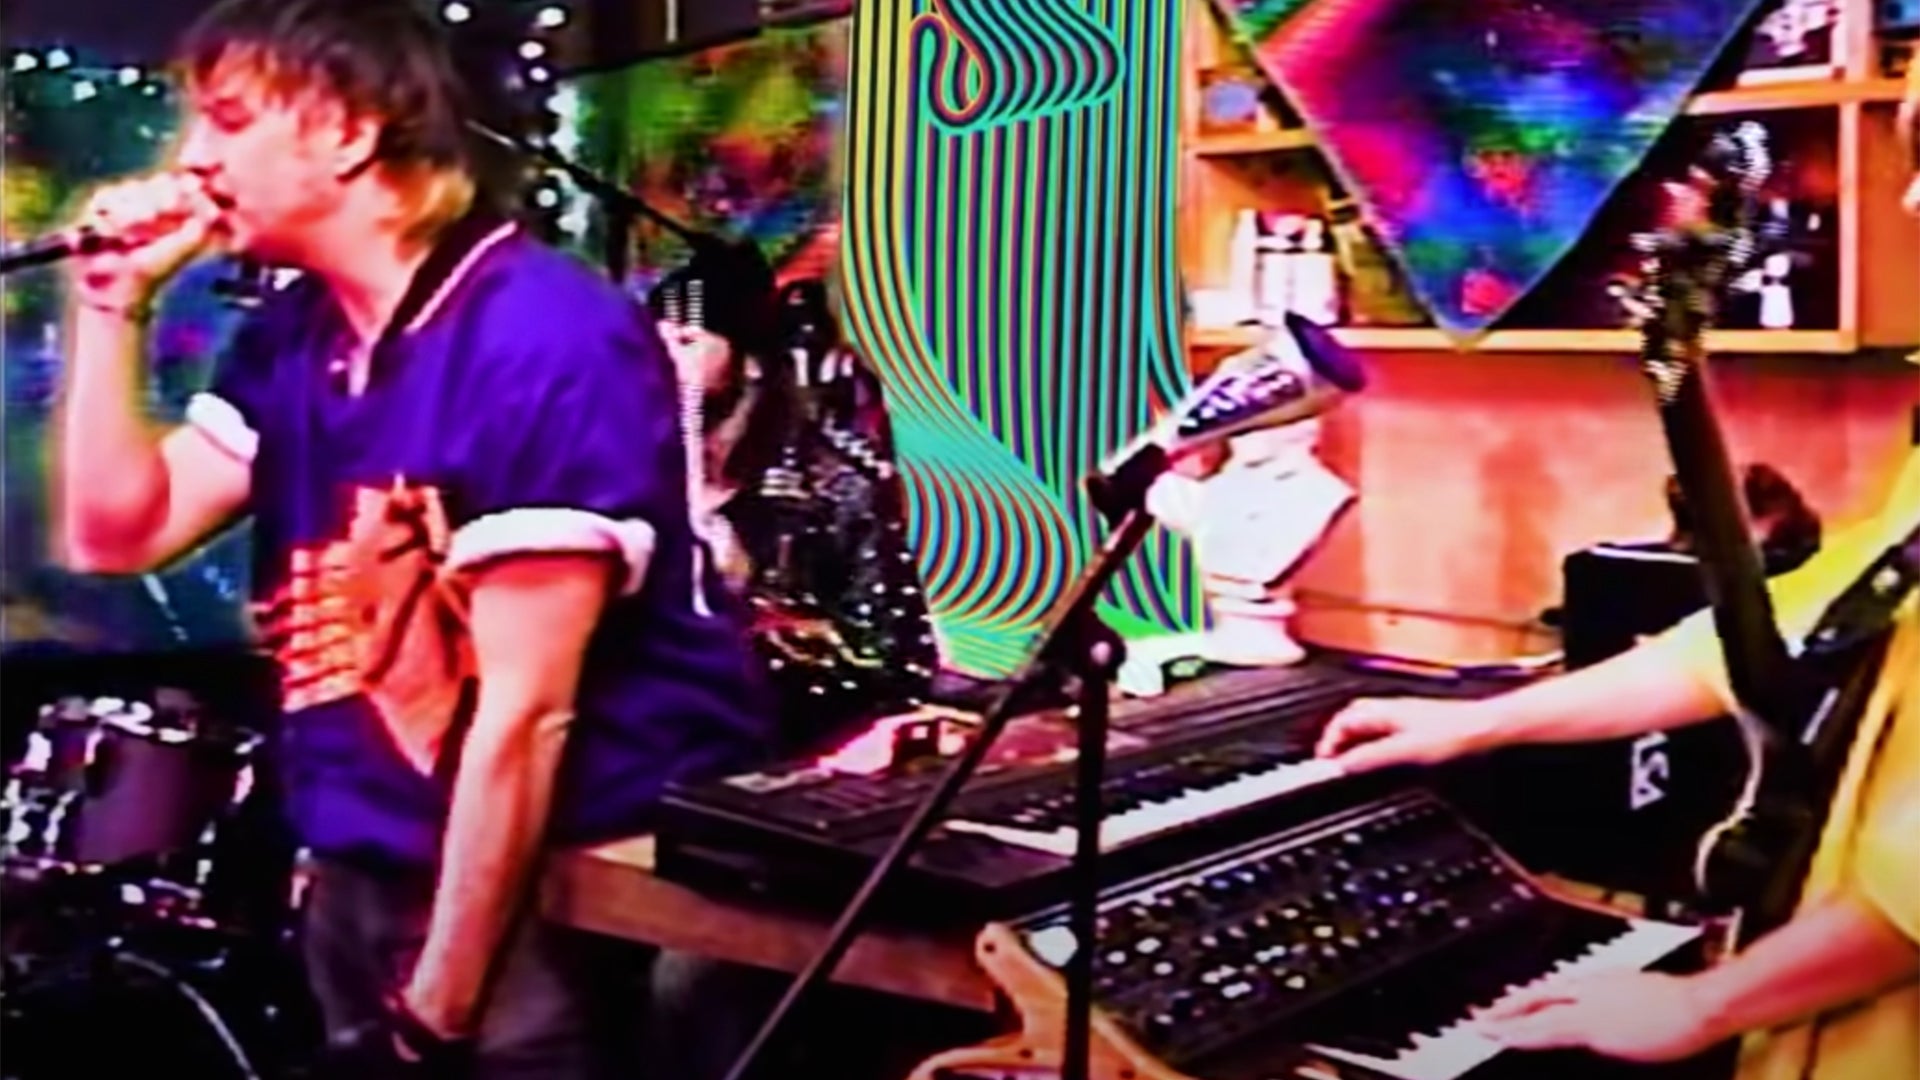 Watch The Voidz perform Alien Crime Lord on Jimmy Fallon